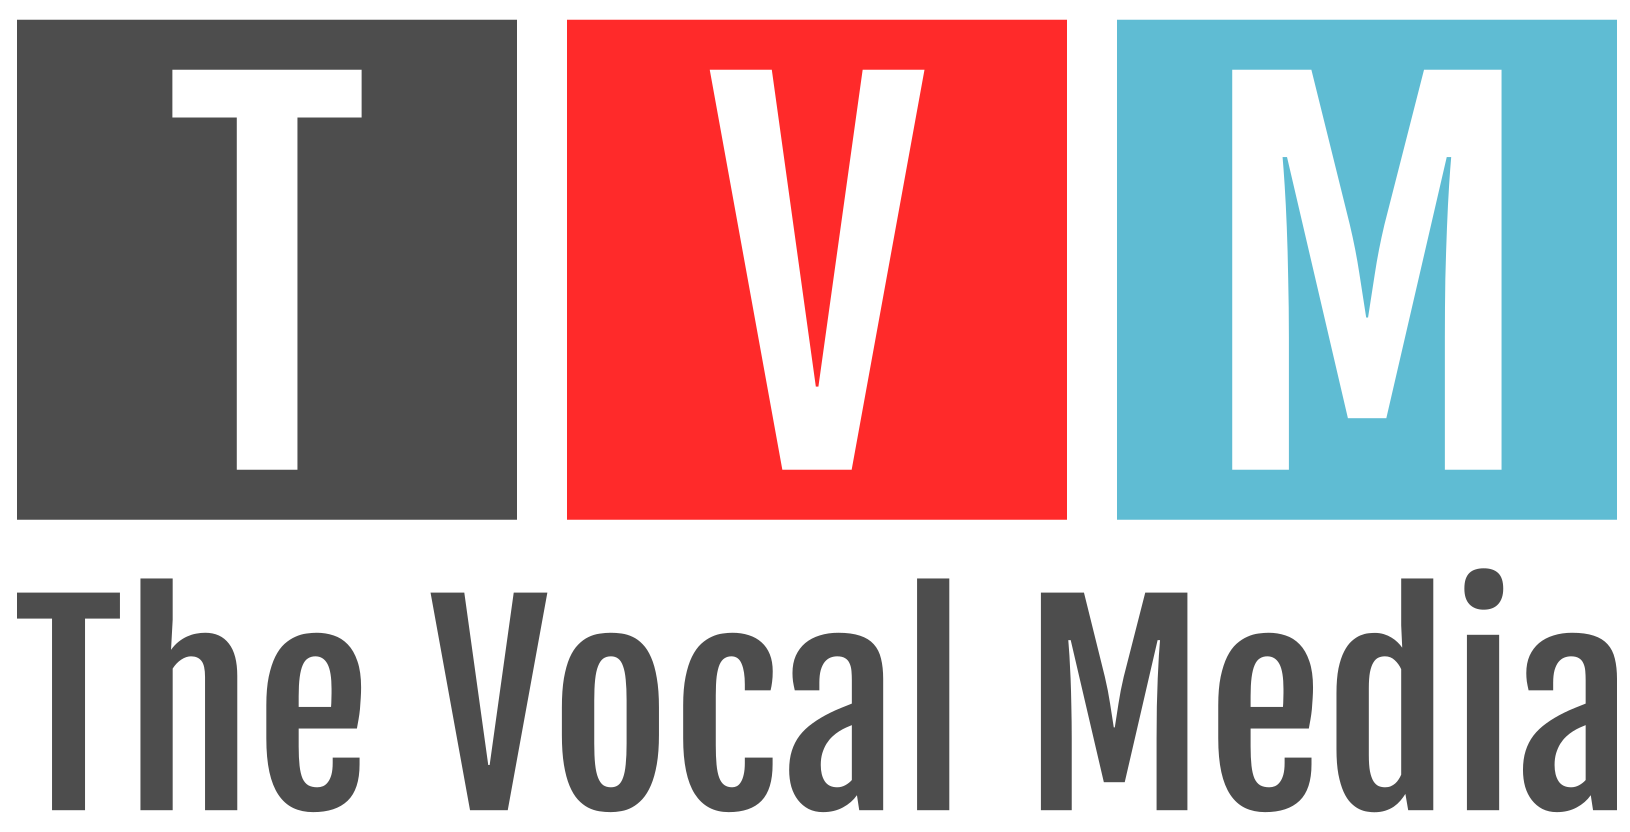 The Vocal Media